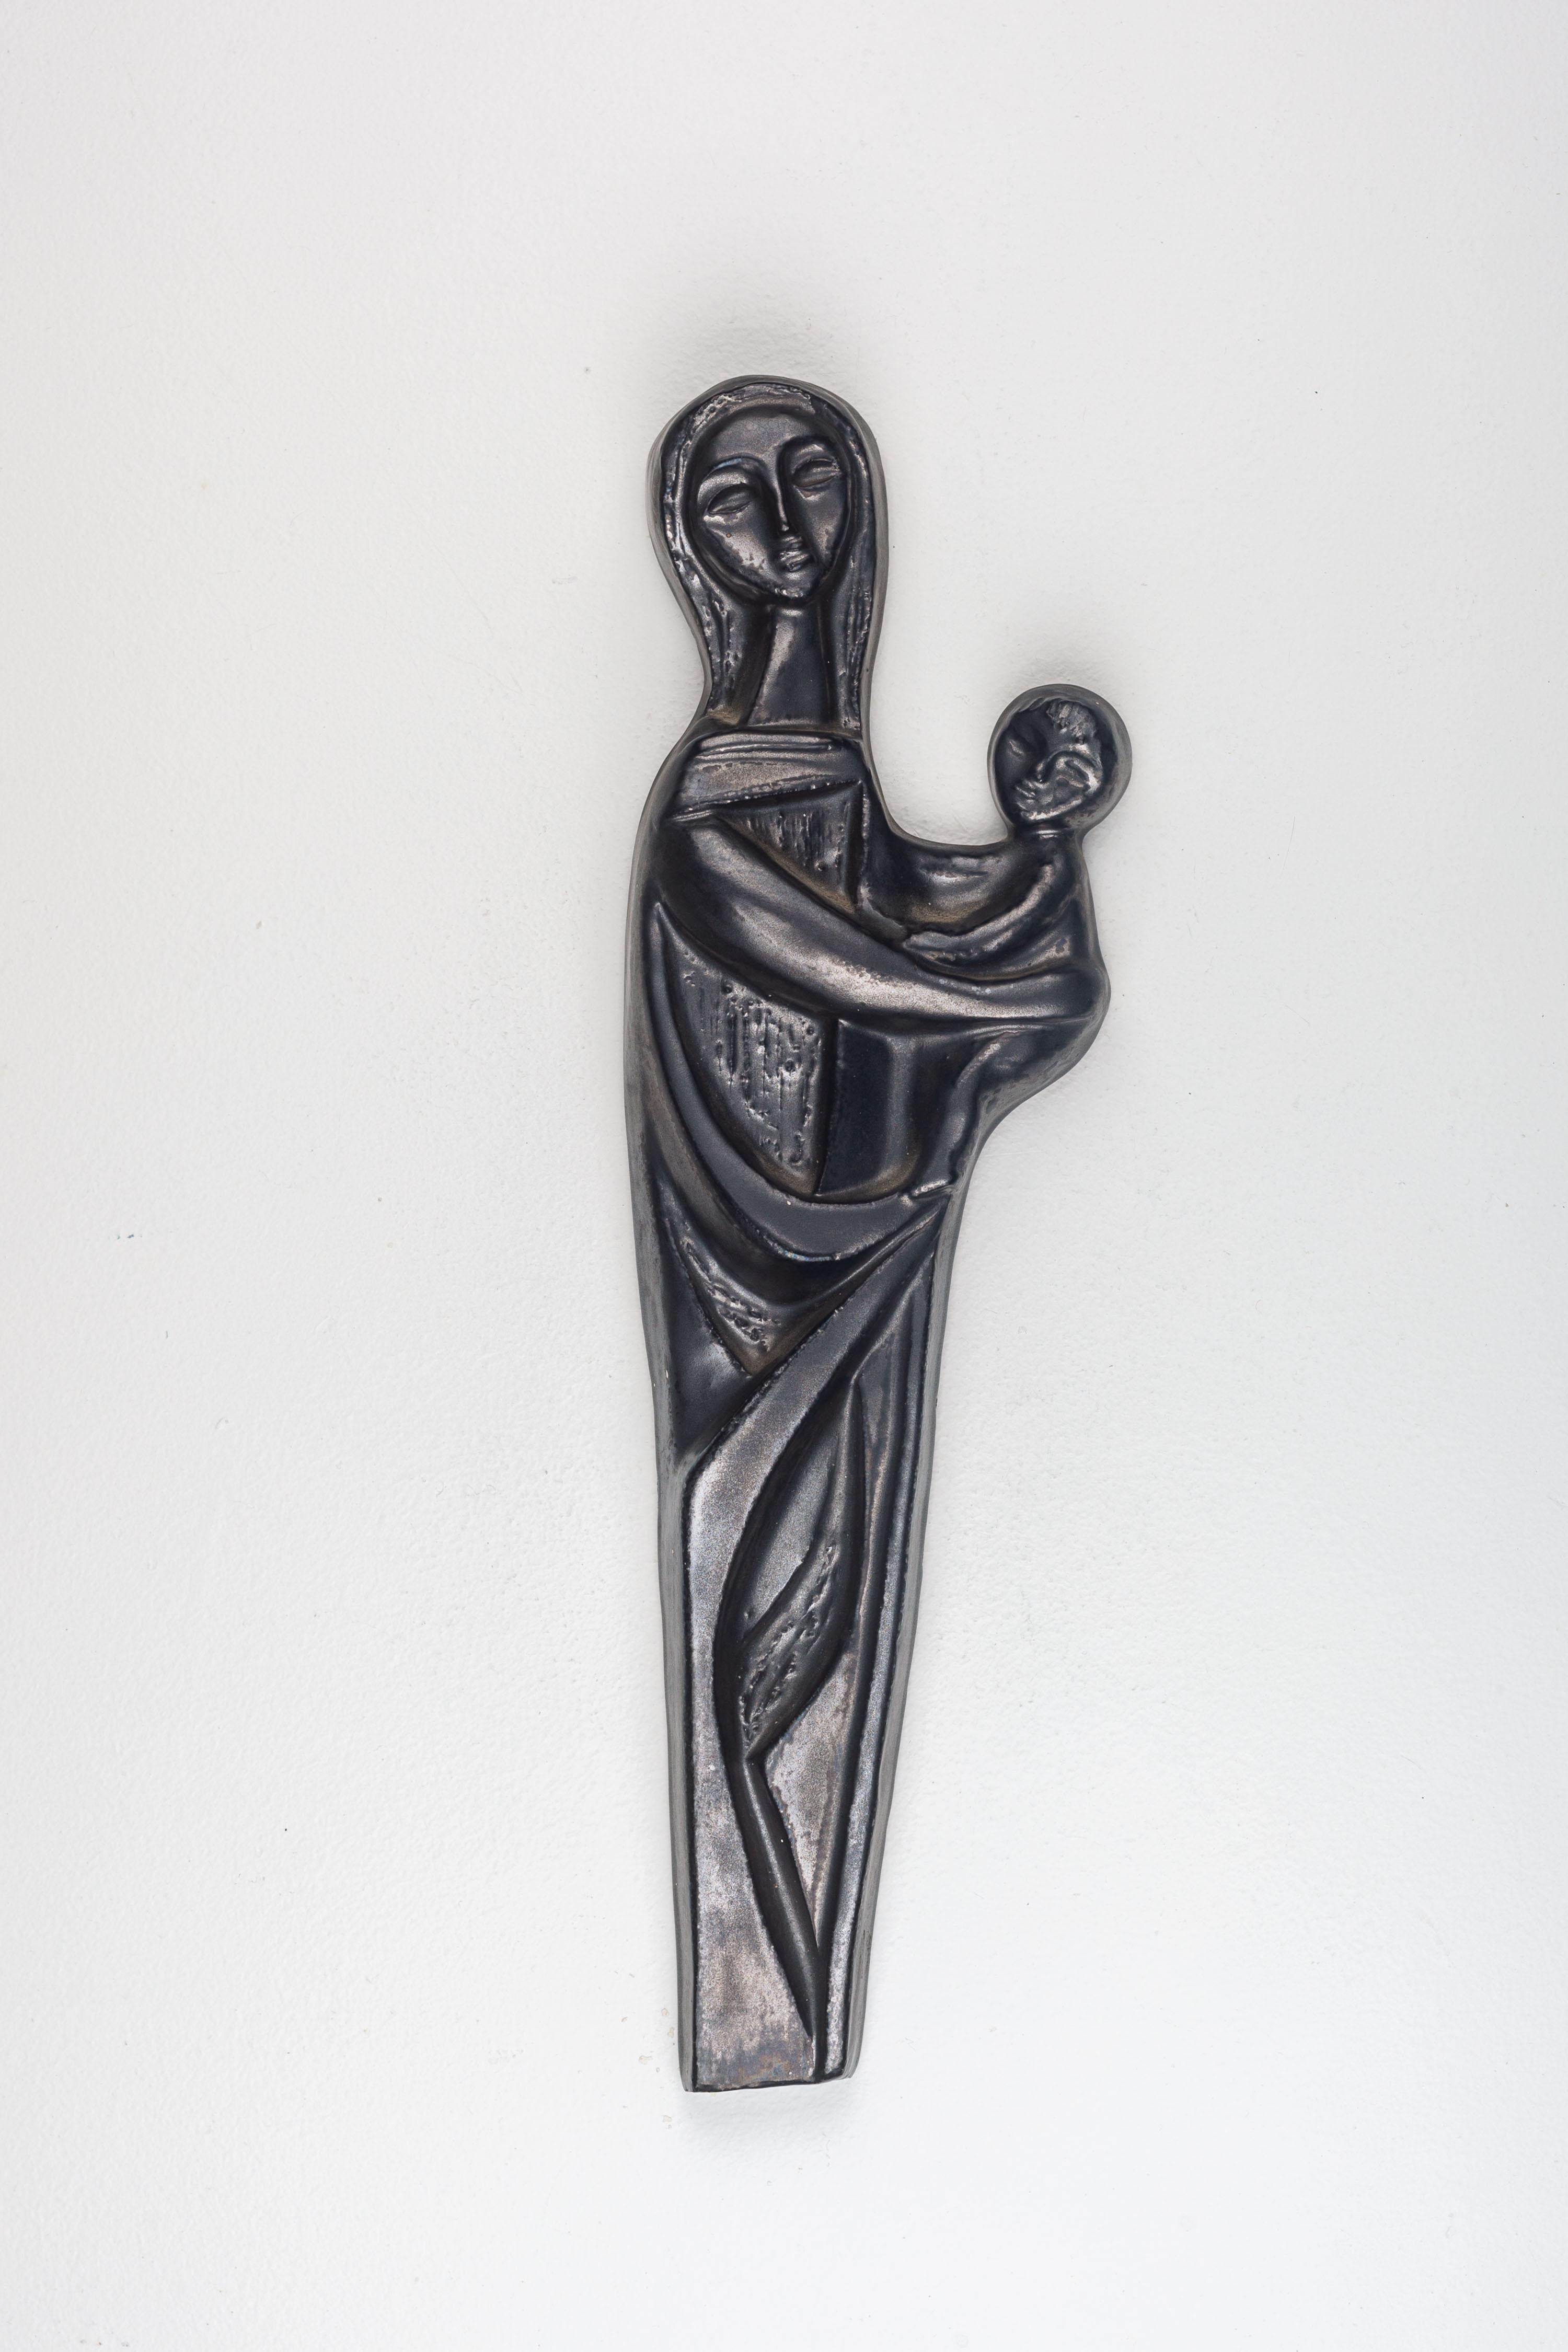 European Ceramic Religious Modernist Wall Art, Pewter Colored Virgin Mary and Child  For Sale